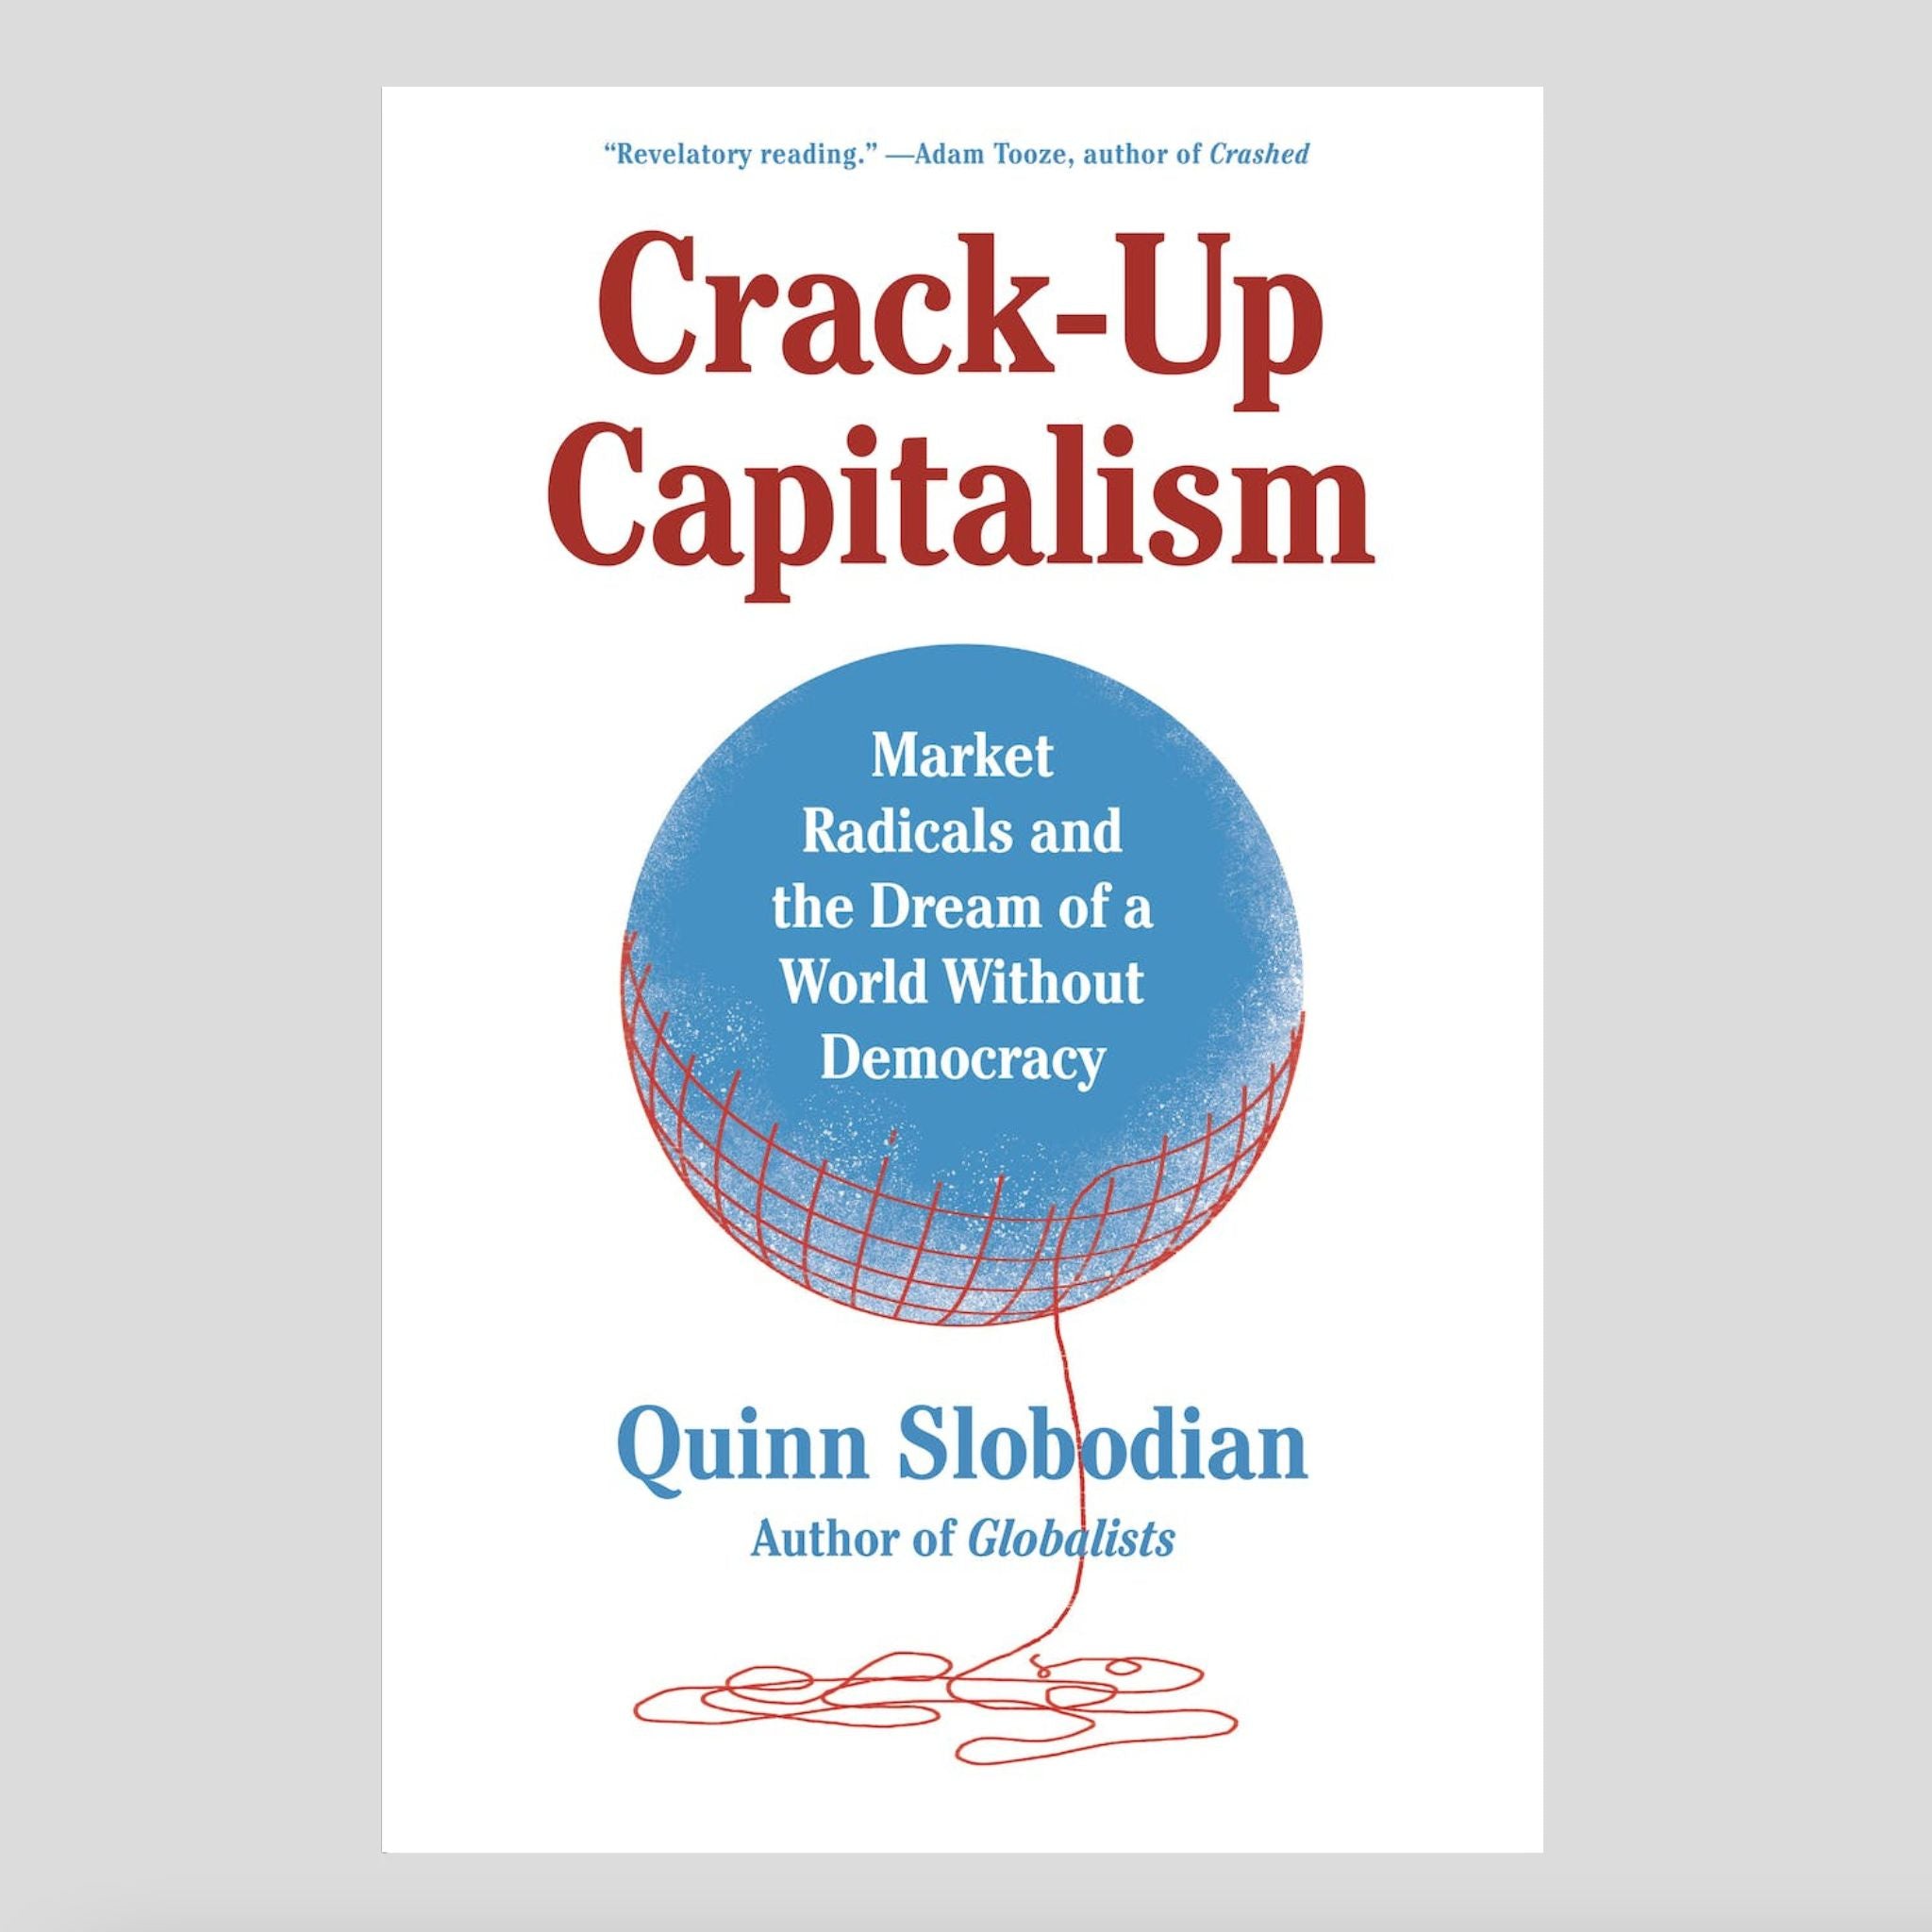 Crack-Up Capitalism: Market Radicals snd the Dream of a World Without Democracy